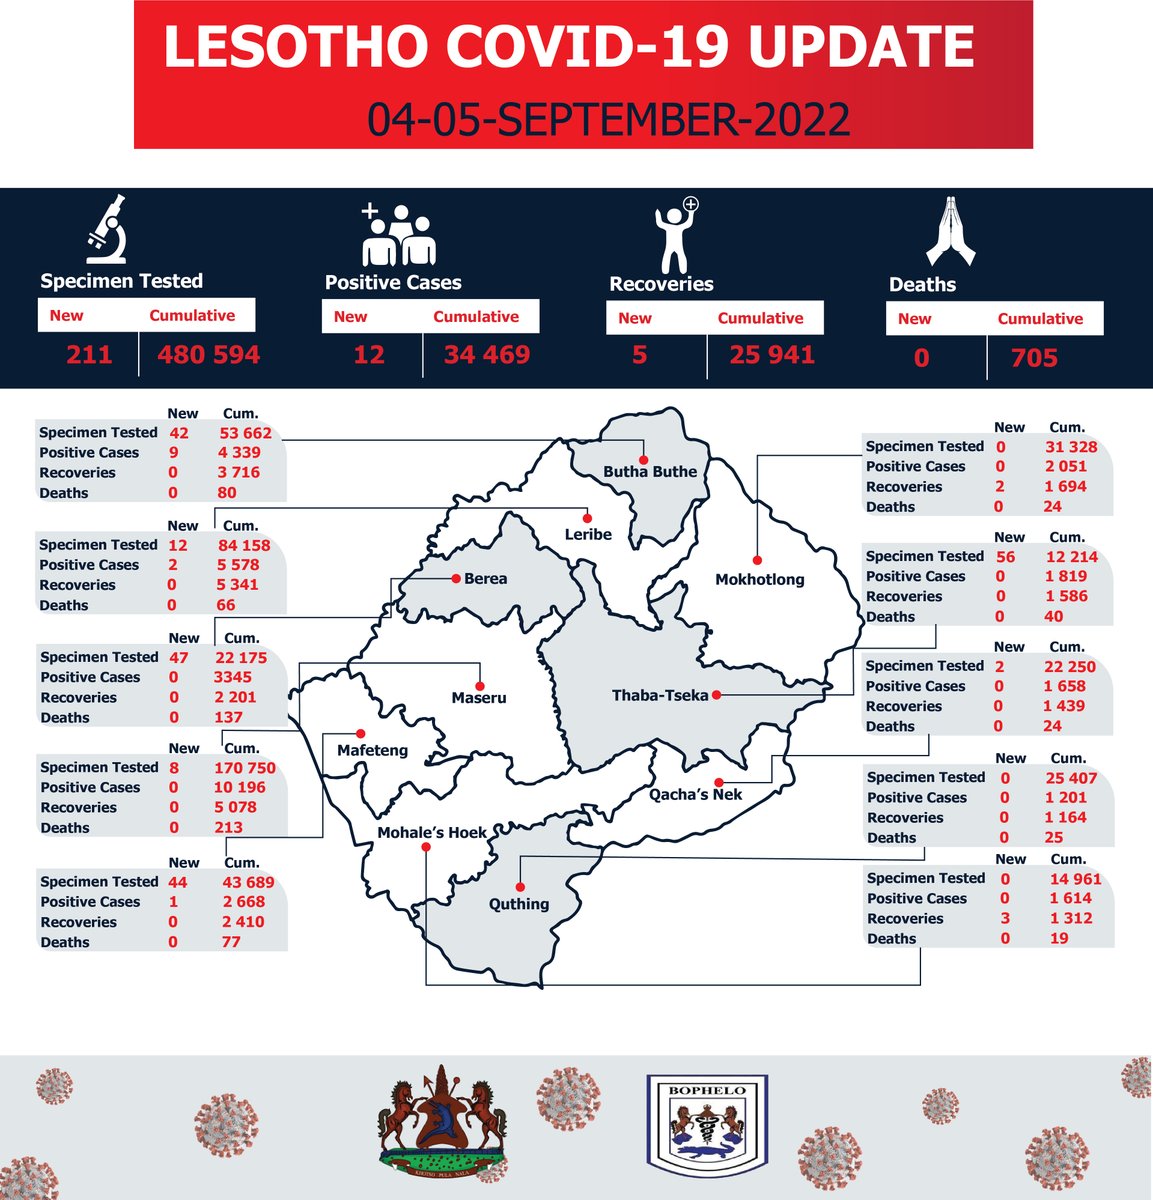 Lesotho COVID-19 Statistics as at 1st - 5th September 2022.
#MaskUp
#StaySafe 
#COVIDLesotho
#VforVaccinate